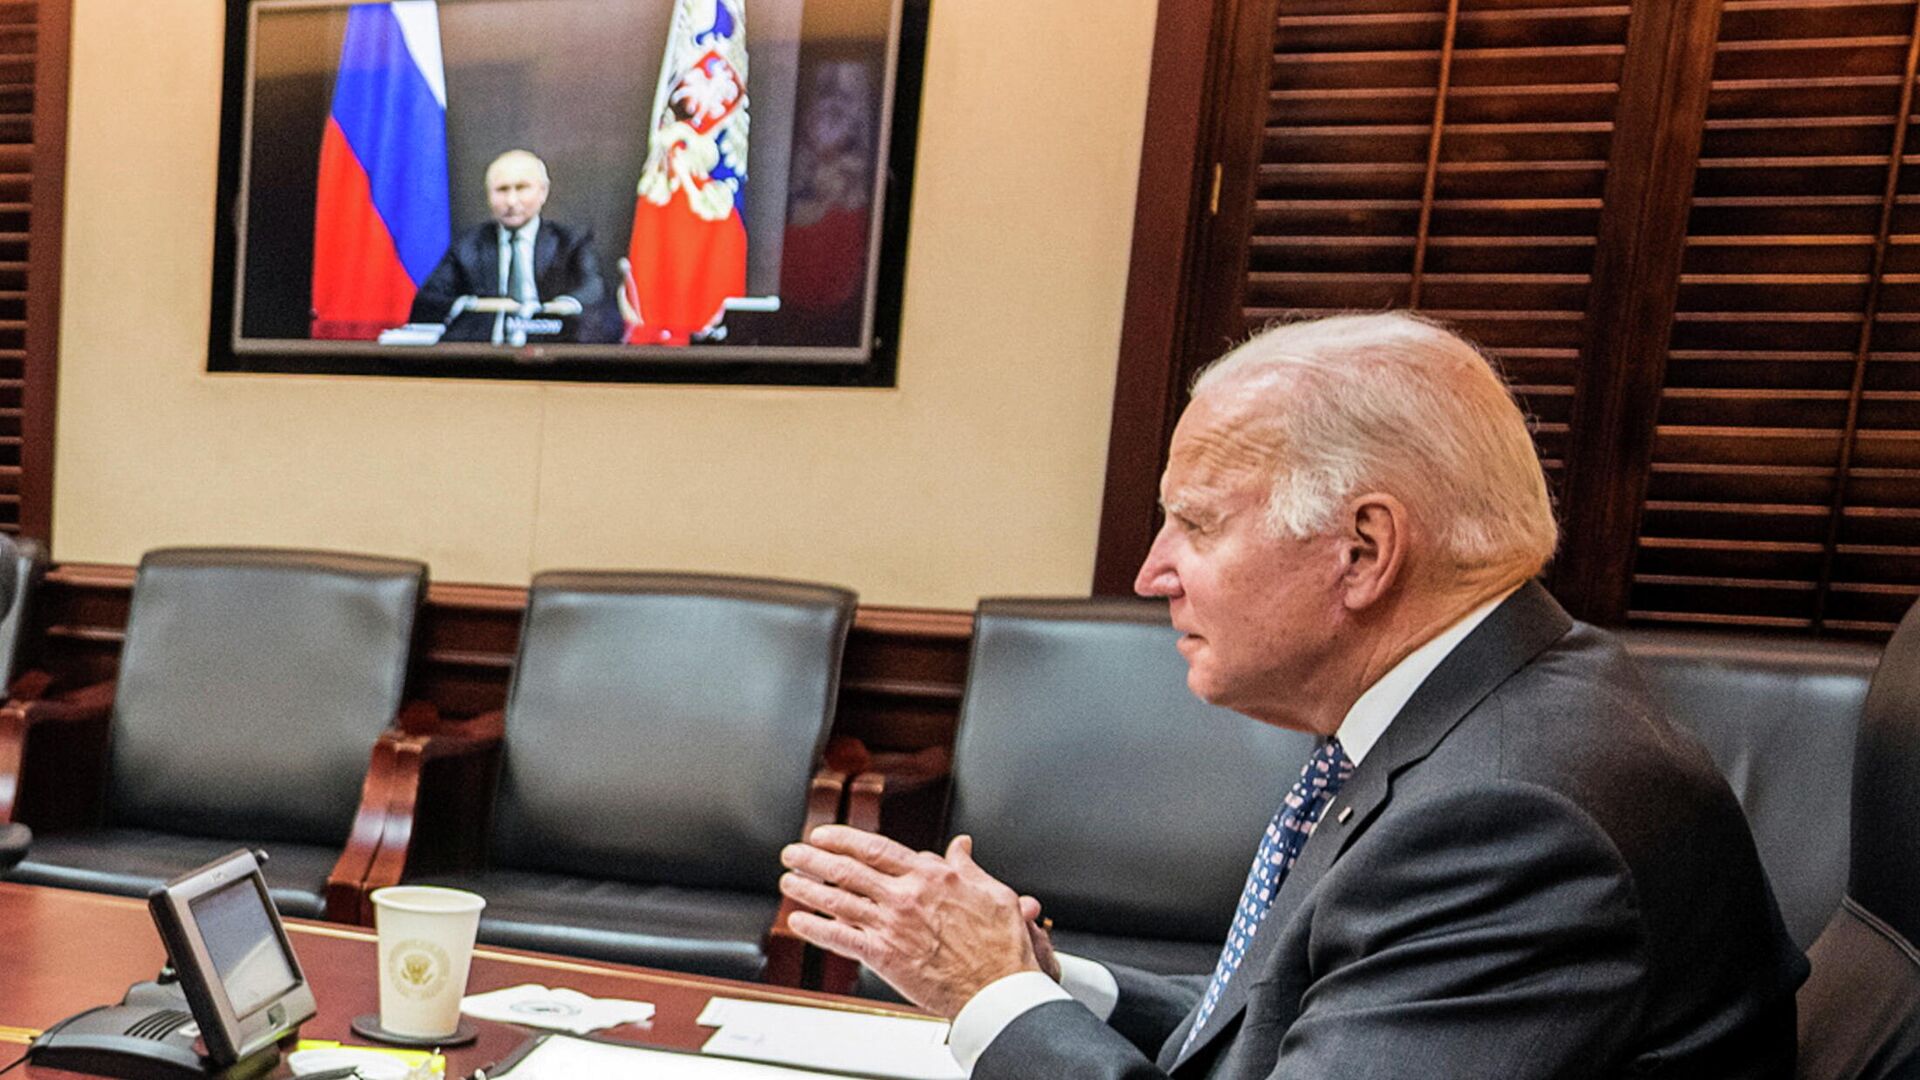 U.S. President Joe Biden holds virtual talks with Russia's President Vladimir Putin amid Western fears that Moscow plans to attack Ukraine, during a secure video call from the Situation Room at the White House in Washington, U.S., December 7, 2021. - Sputnik International, 1920, 01.01.2022